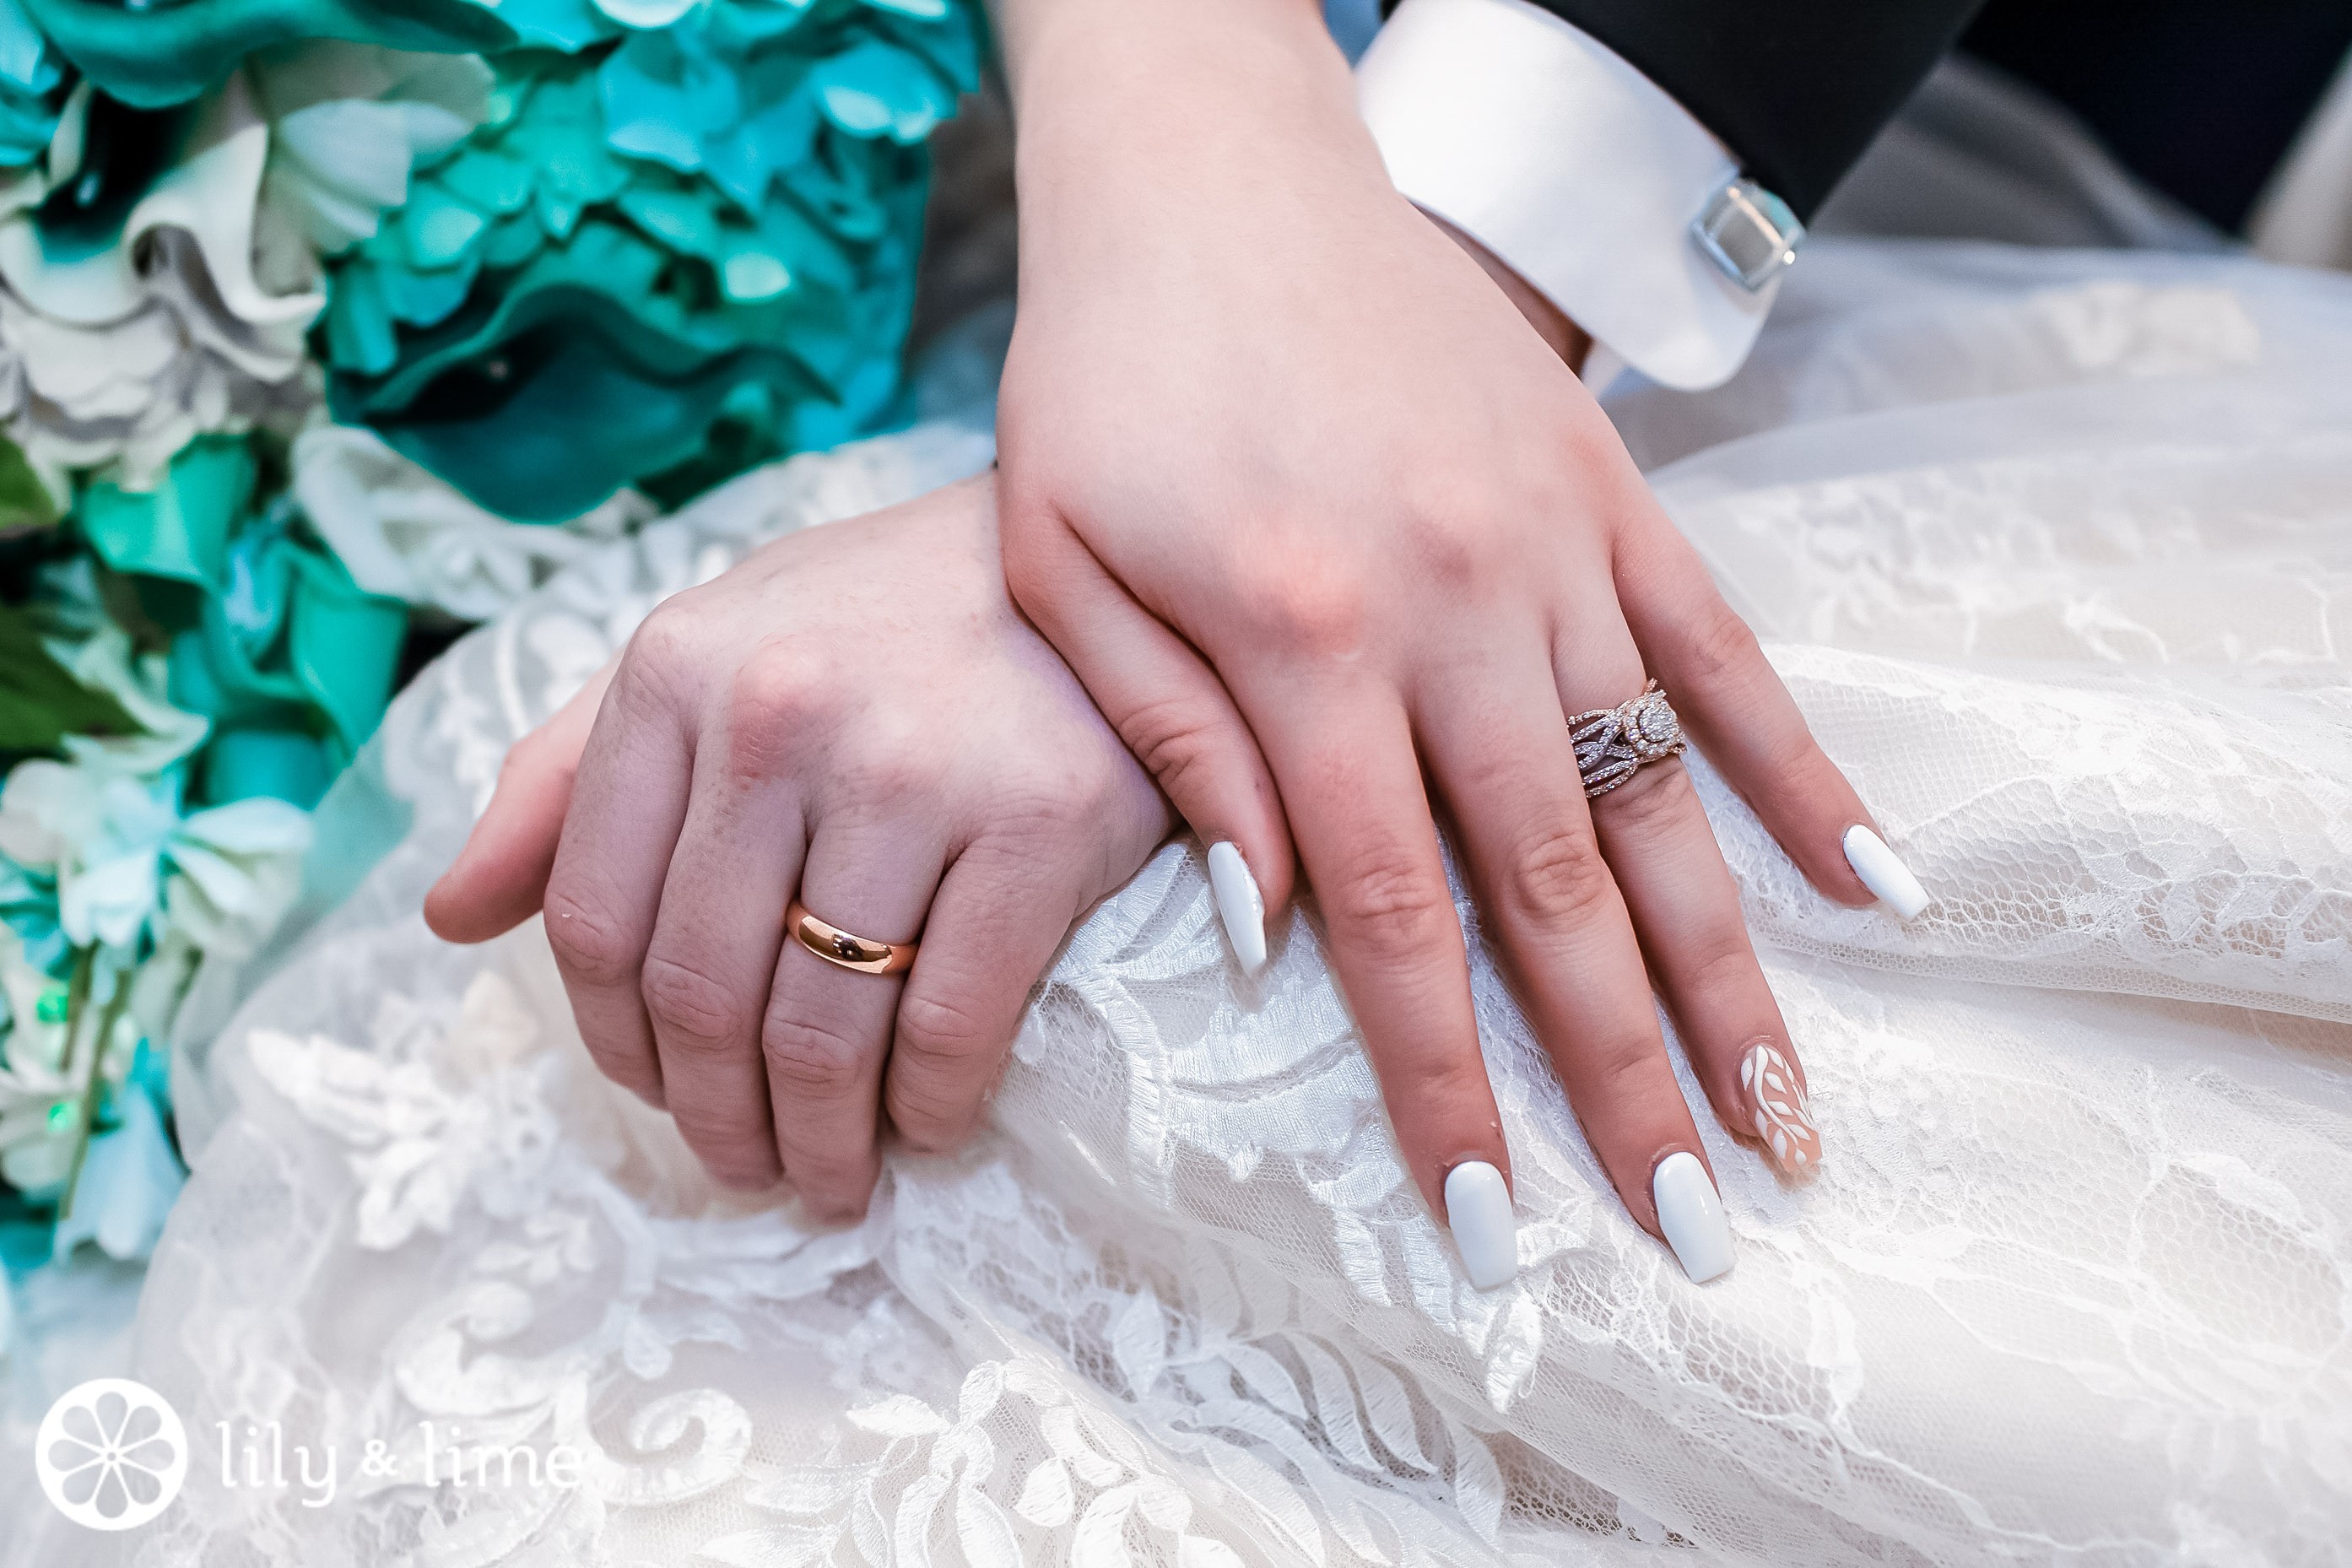 Wedding Manicures that are Literal Works of Art 4 19 2022 016 2787 1858 90